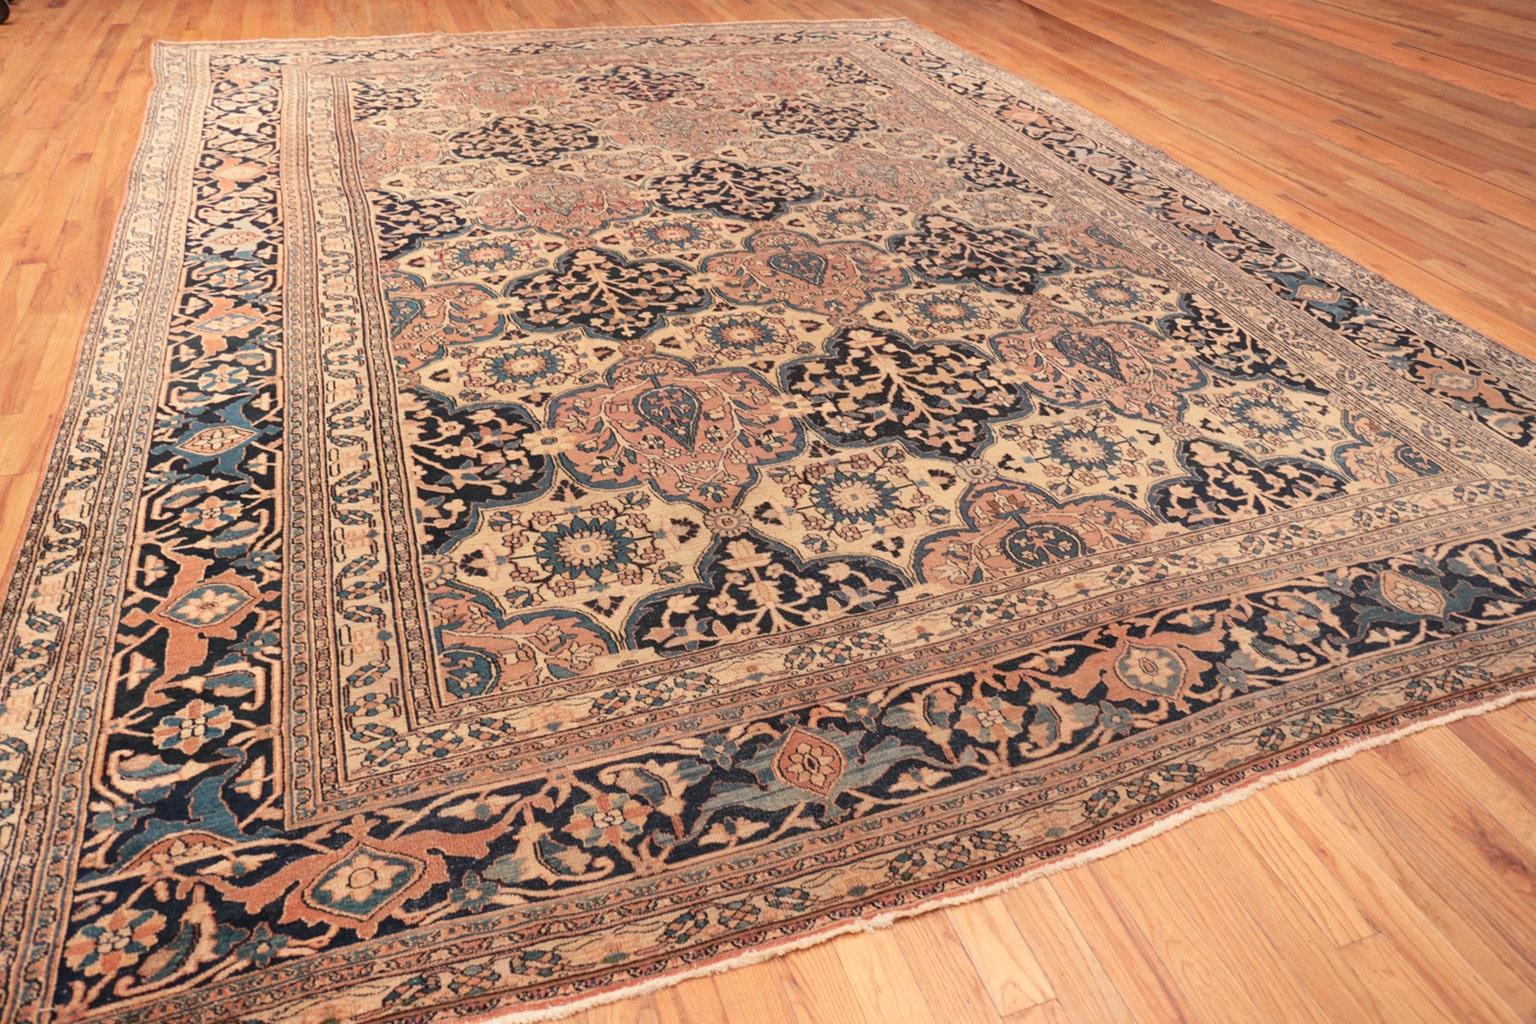 20th Century Antique Persian Khorassan Rug. Size: 12 ft 4 in x 15 ft 9 in (3.76 m x 4.8 m)